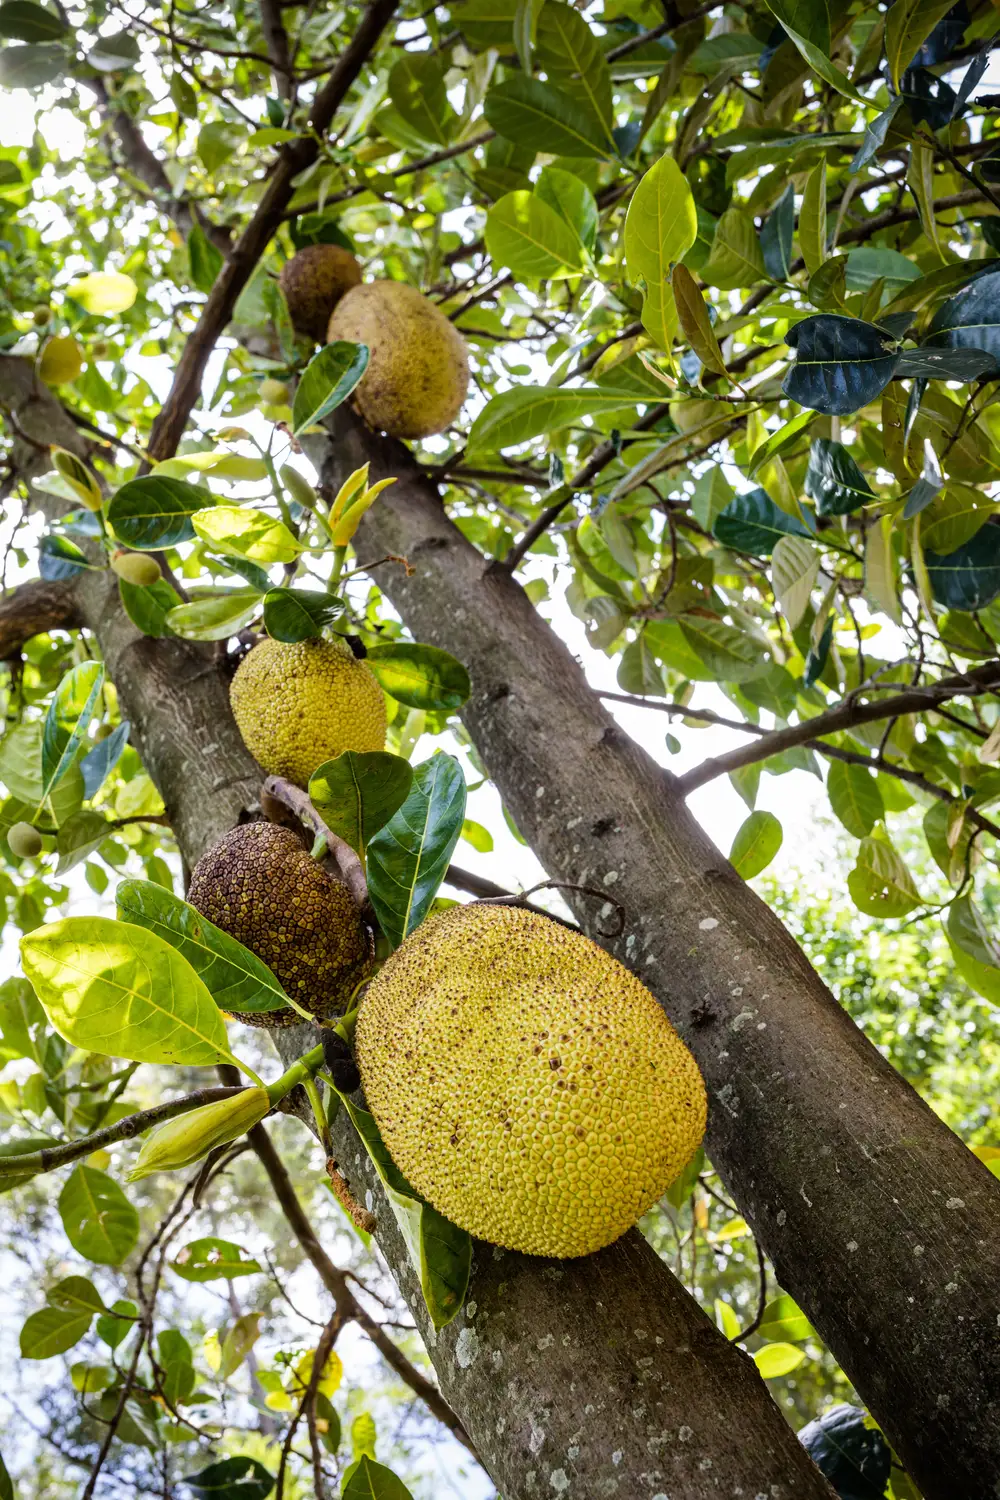 Fruits growing on farm trees